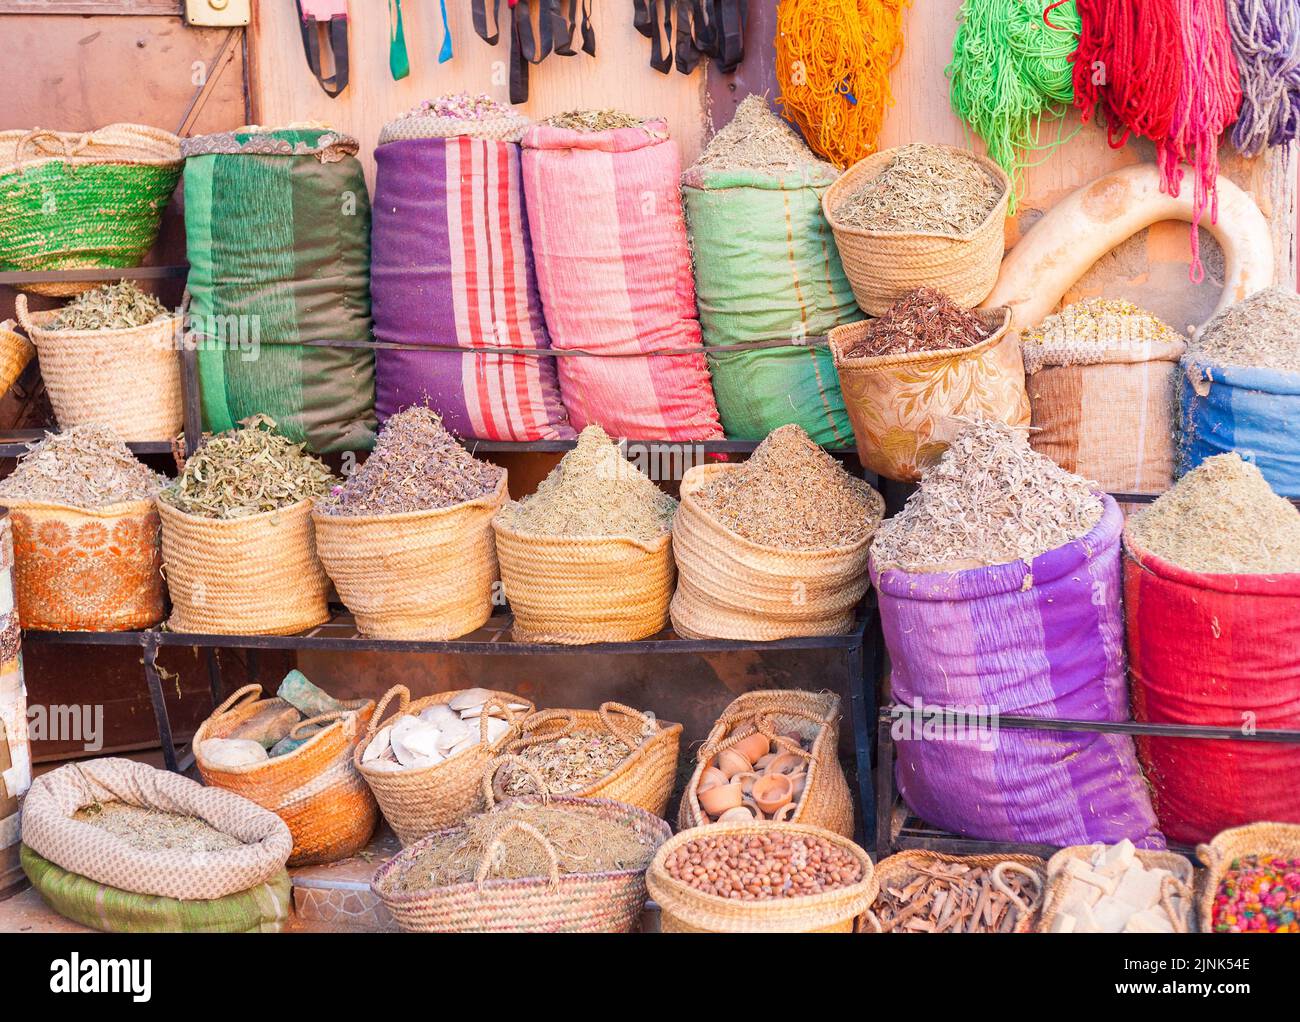 Market stall at souk in Marrakesh offering mostly herbs Stock Photo